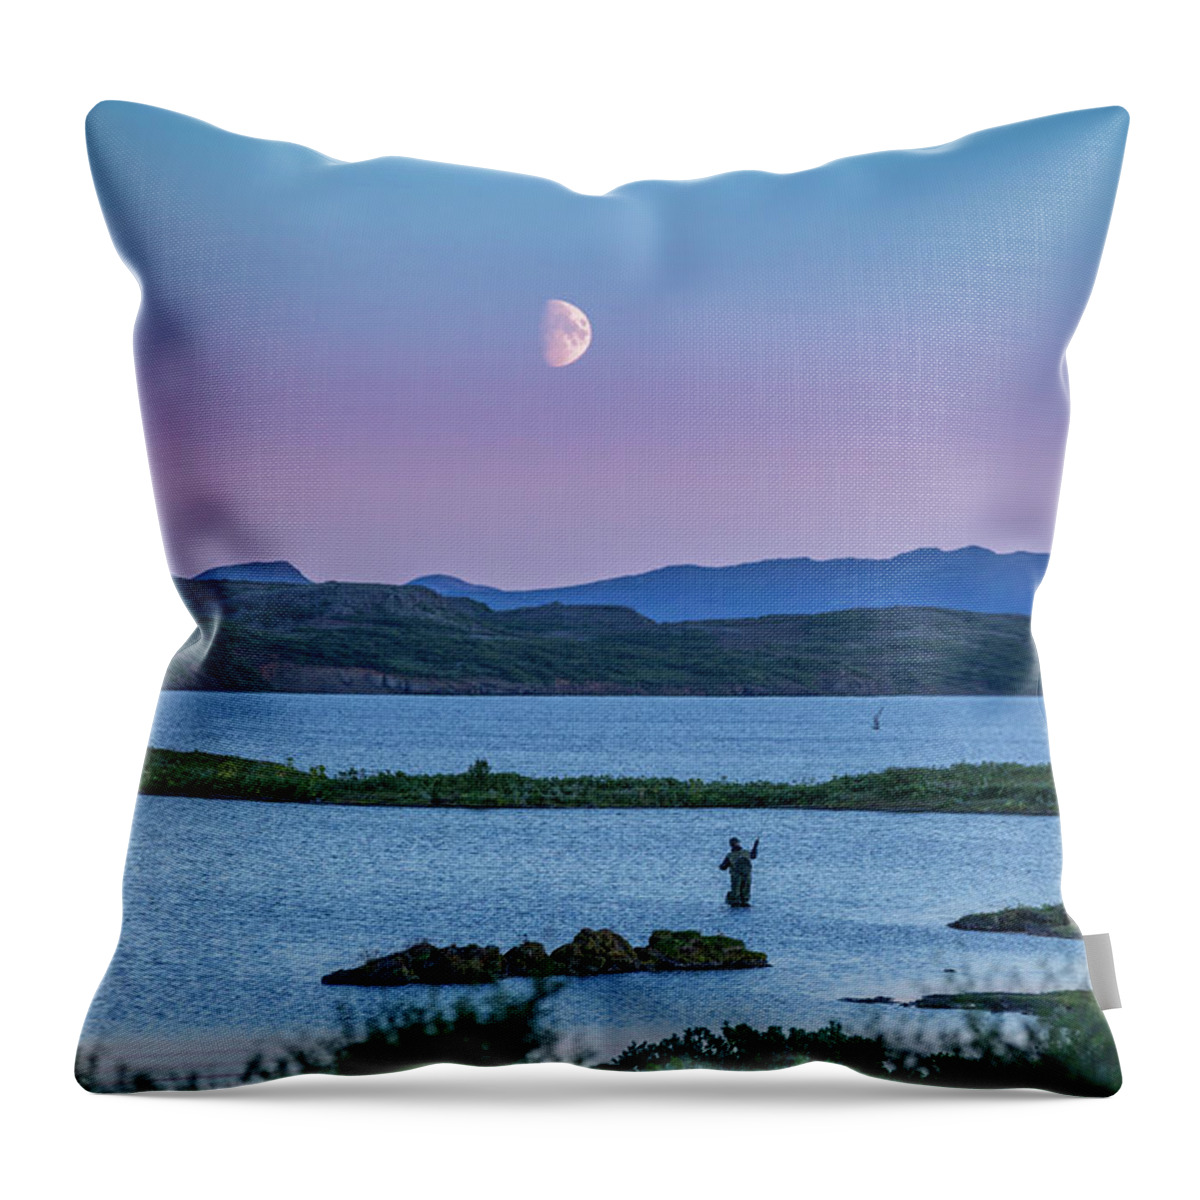 Scenics Throw Pillow featuring the photograph Fishing Under The Moonlight by Arctic-images